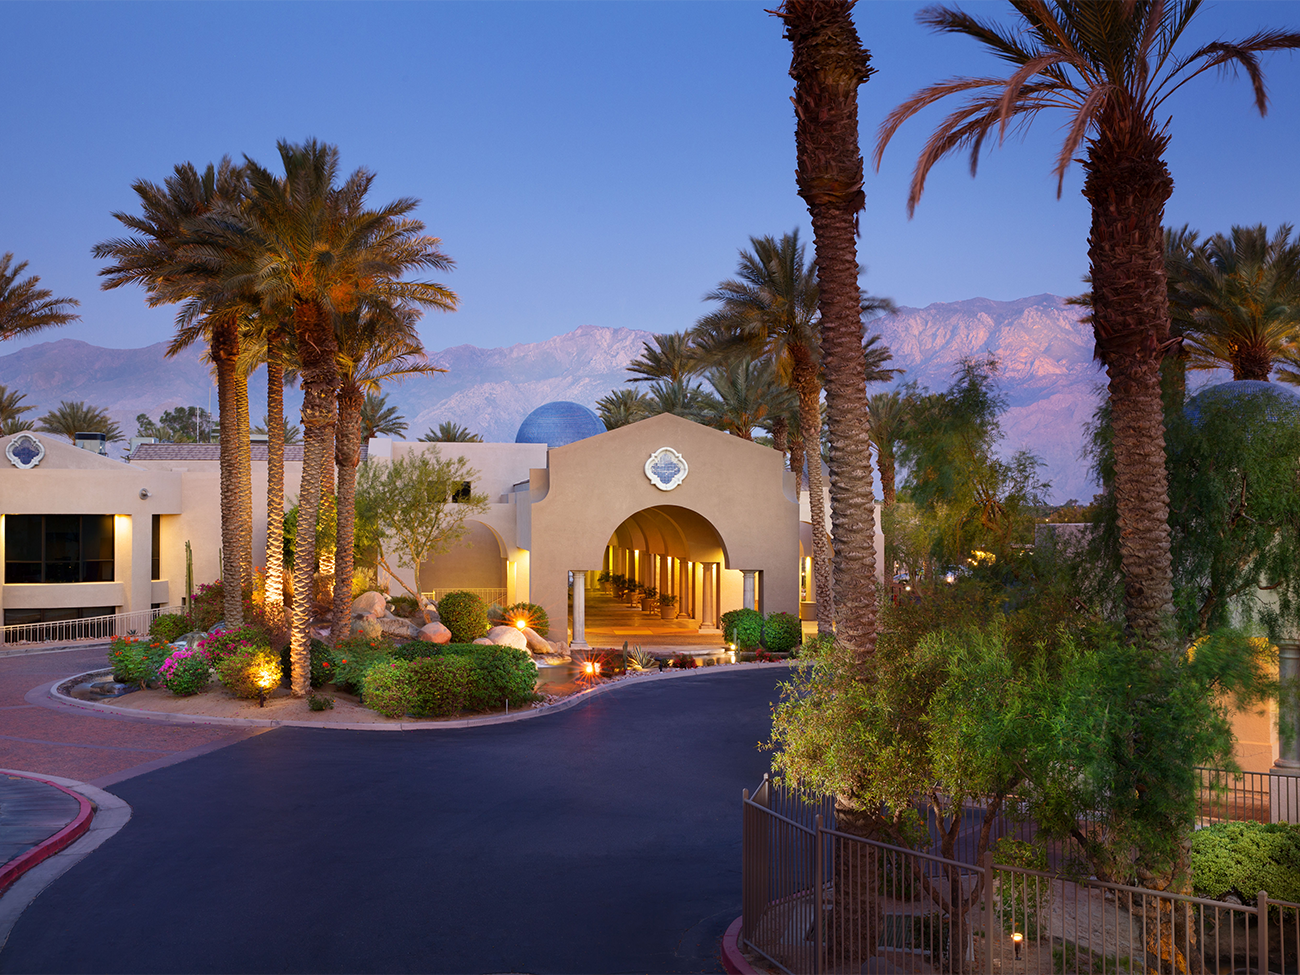 Image of The Westin Mission Hills Resort Villas, Palm Springs in Rancho Mirage.